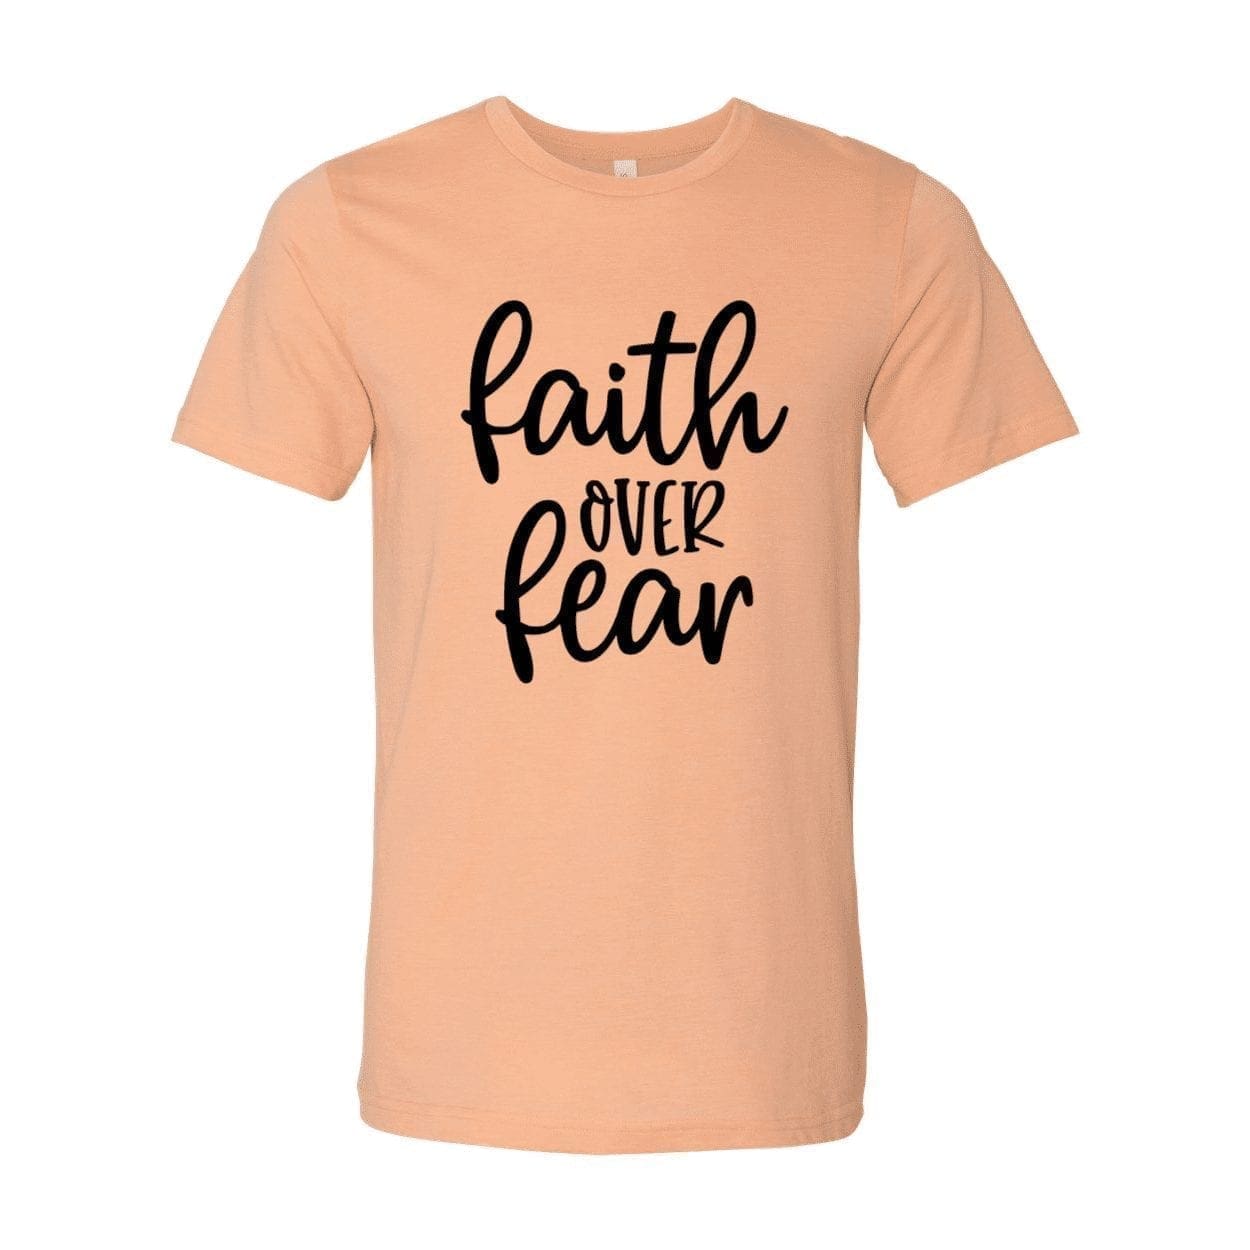 Faith Over Fear T-Shirt a Must Wear | My Small Store